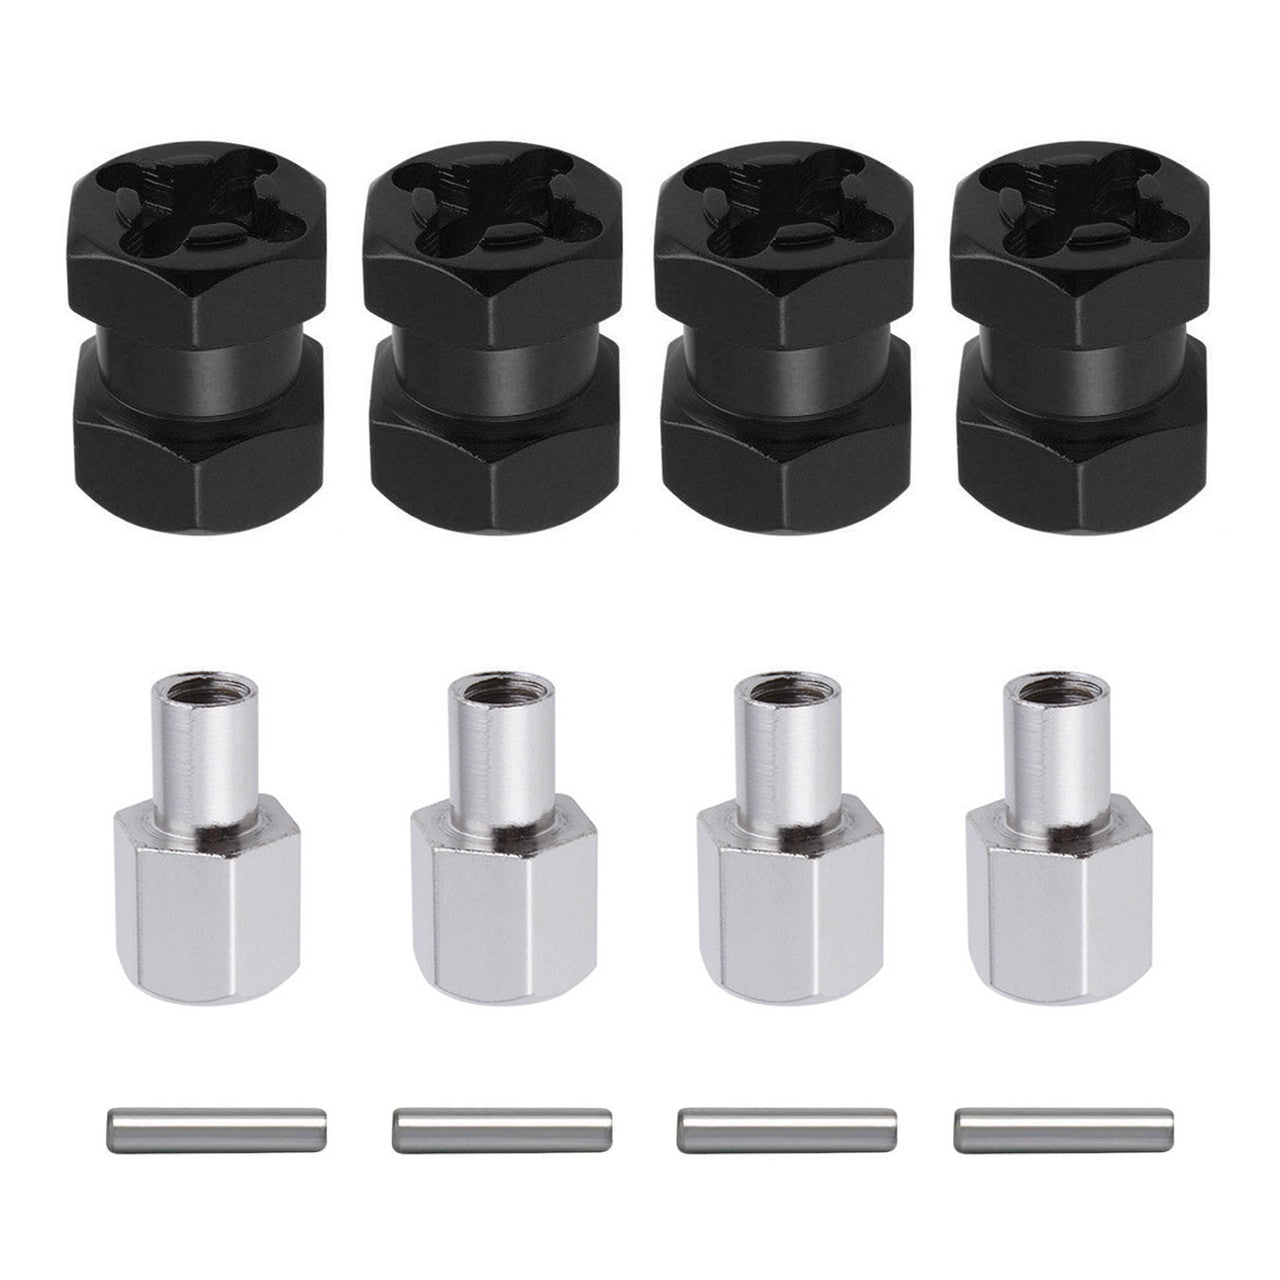 Wheel Hub Hex Drive Adaptor Extension for RC Cars